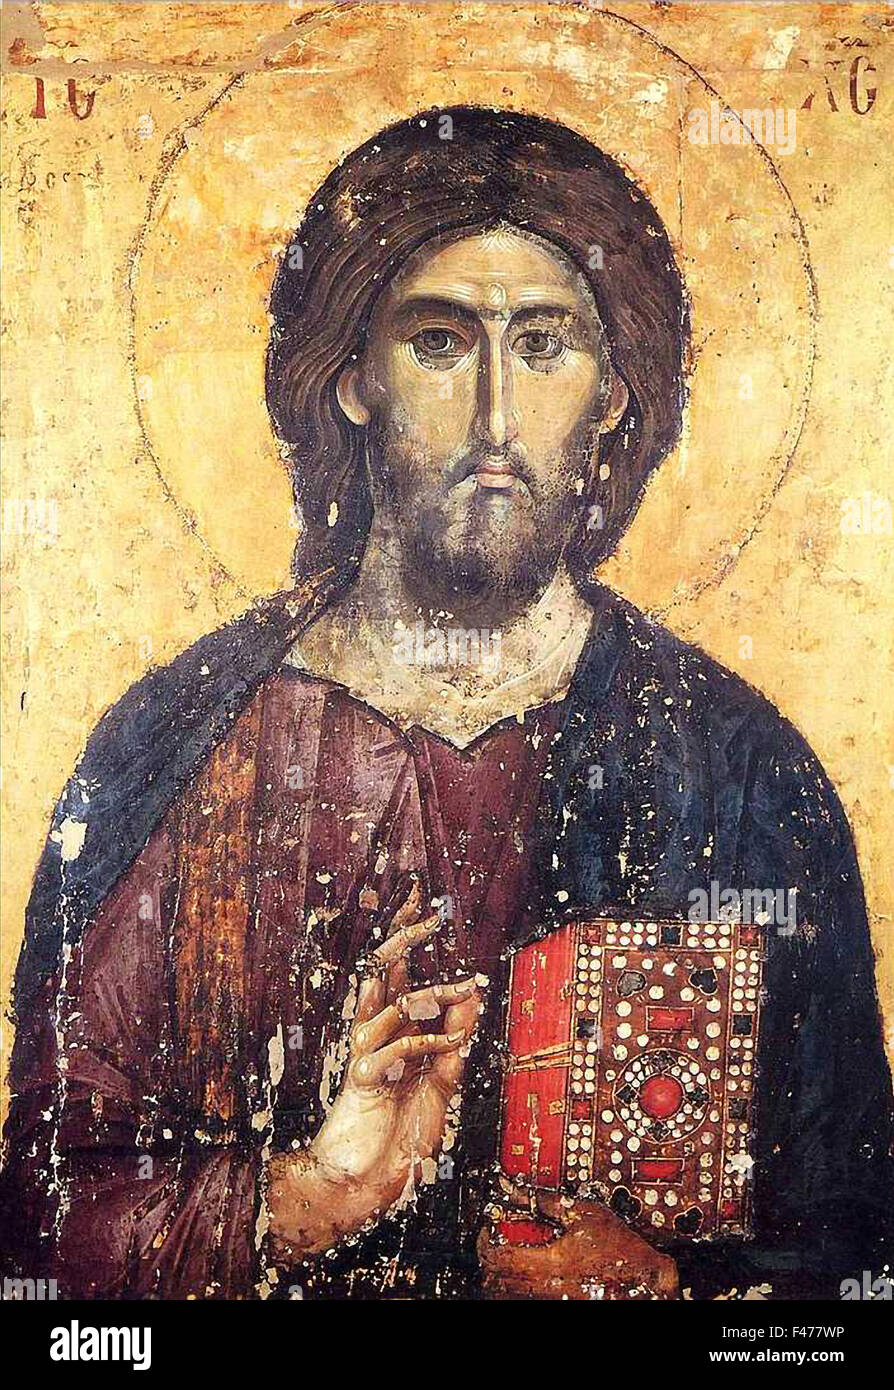 5778. Painting of Jesus Christ dating c. 13th. C located in a monastery in Serbia (Yugoslavia). Stock Photo